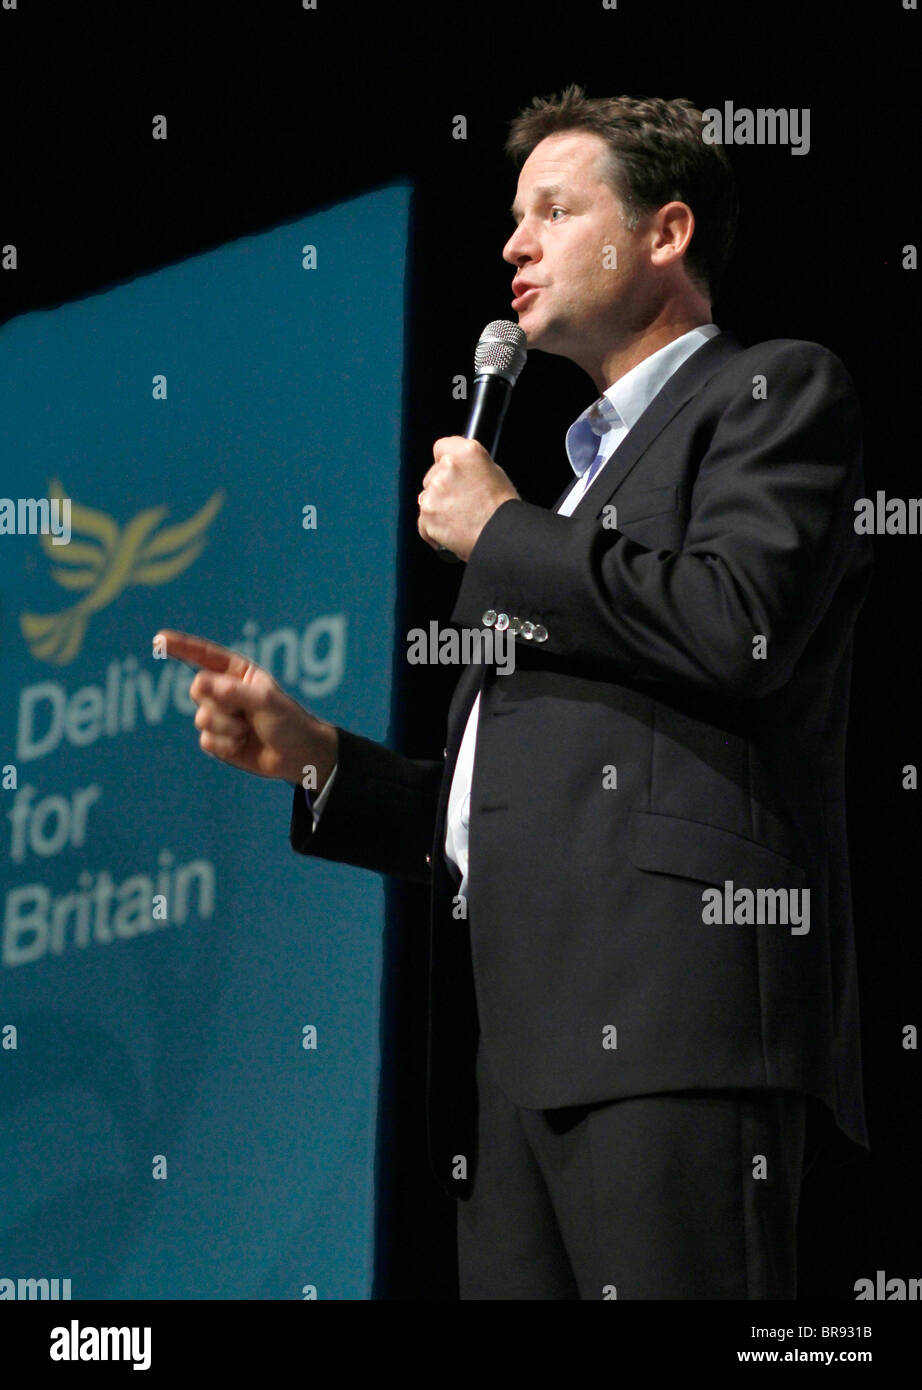 NICK CLEGG MP DEPUTY PRIME MINISTER 19 September 2010 THE ACC LIVERPOOL ENGLAND Stock Photo